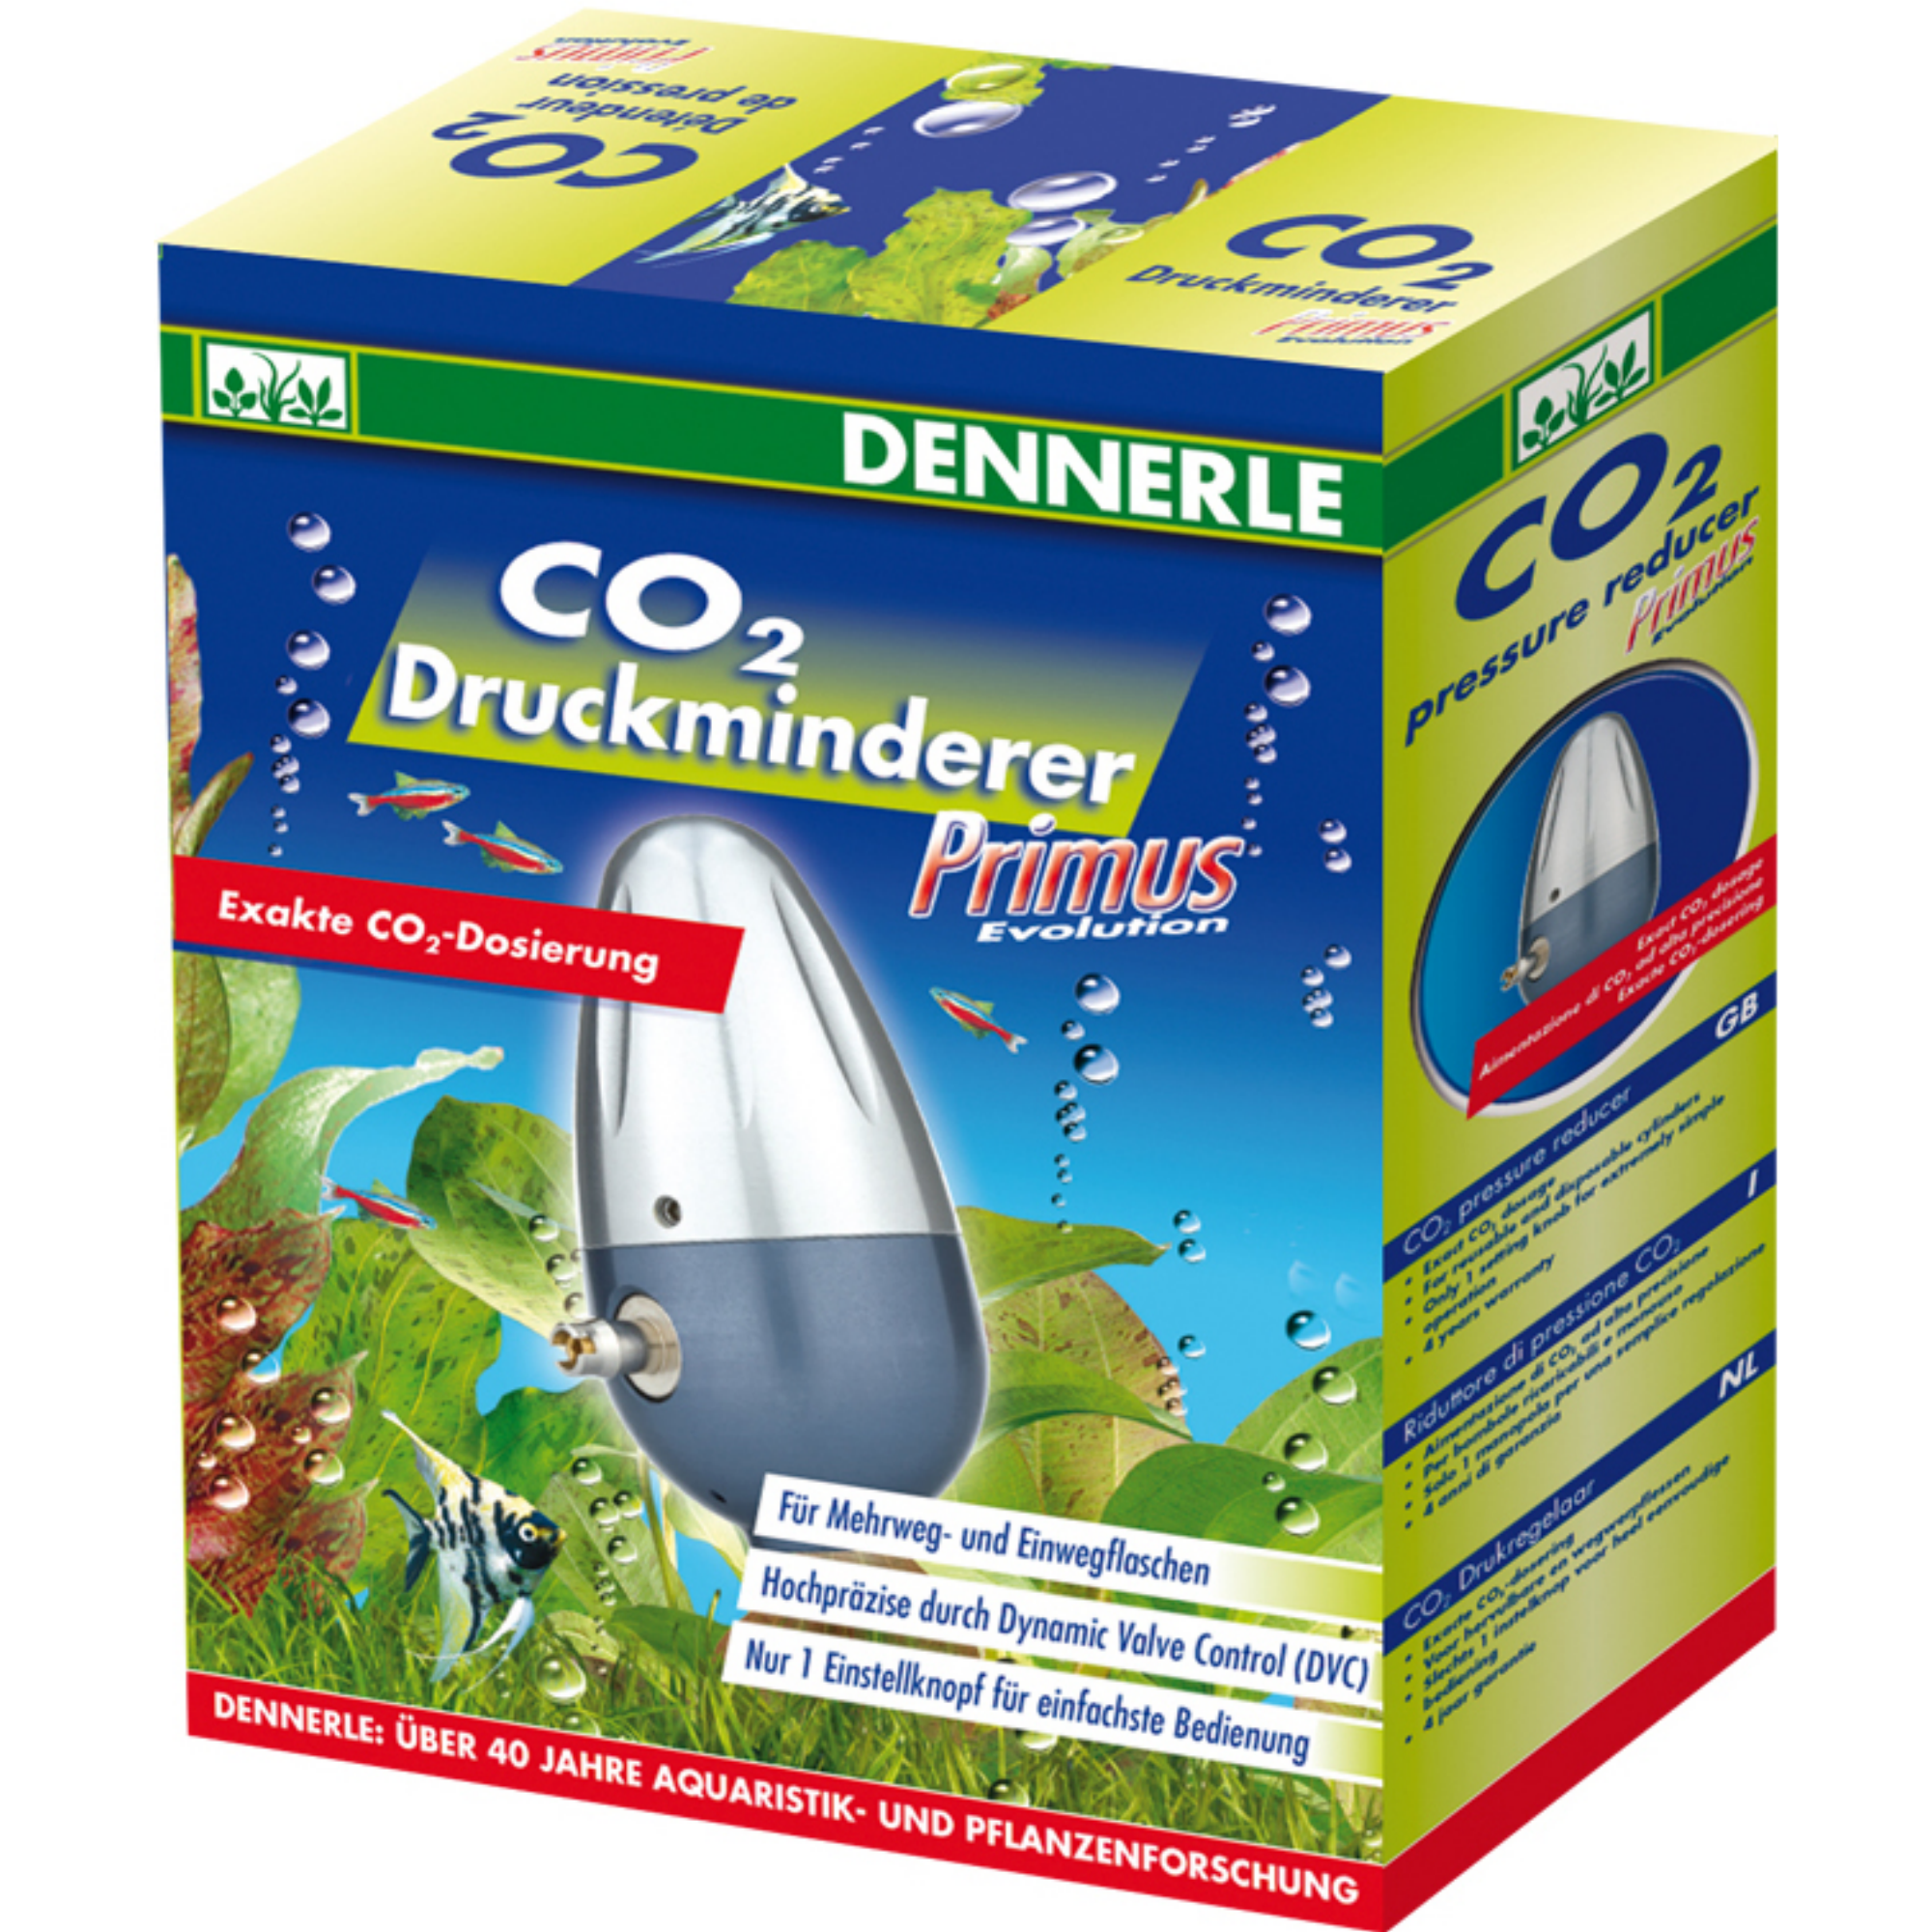 CO2 Druckminderer Primus Dennerle + product picture